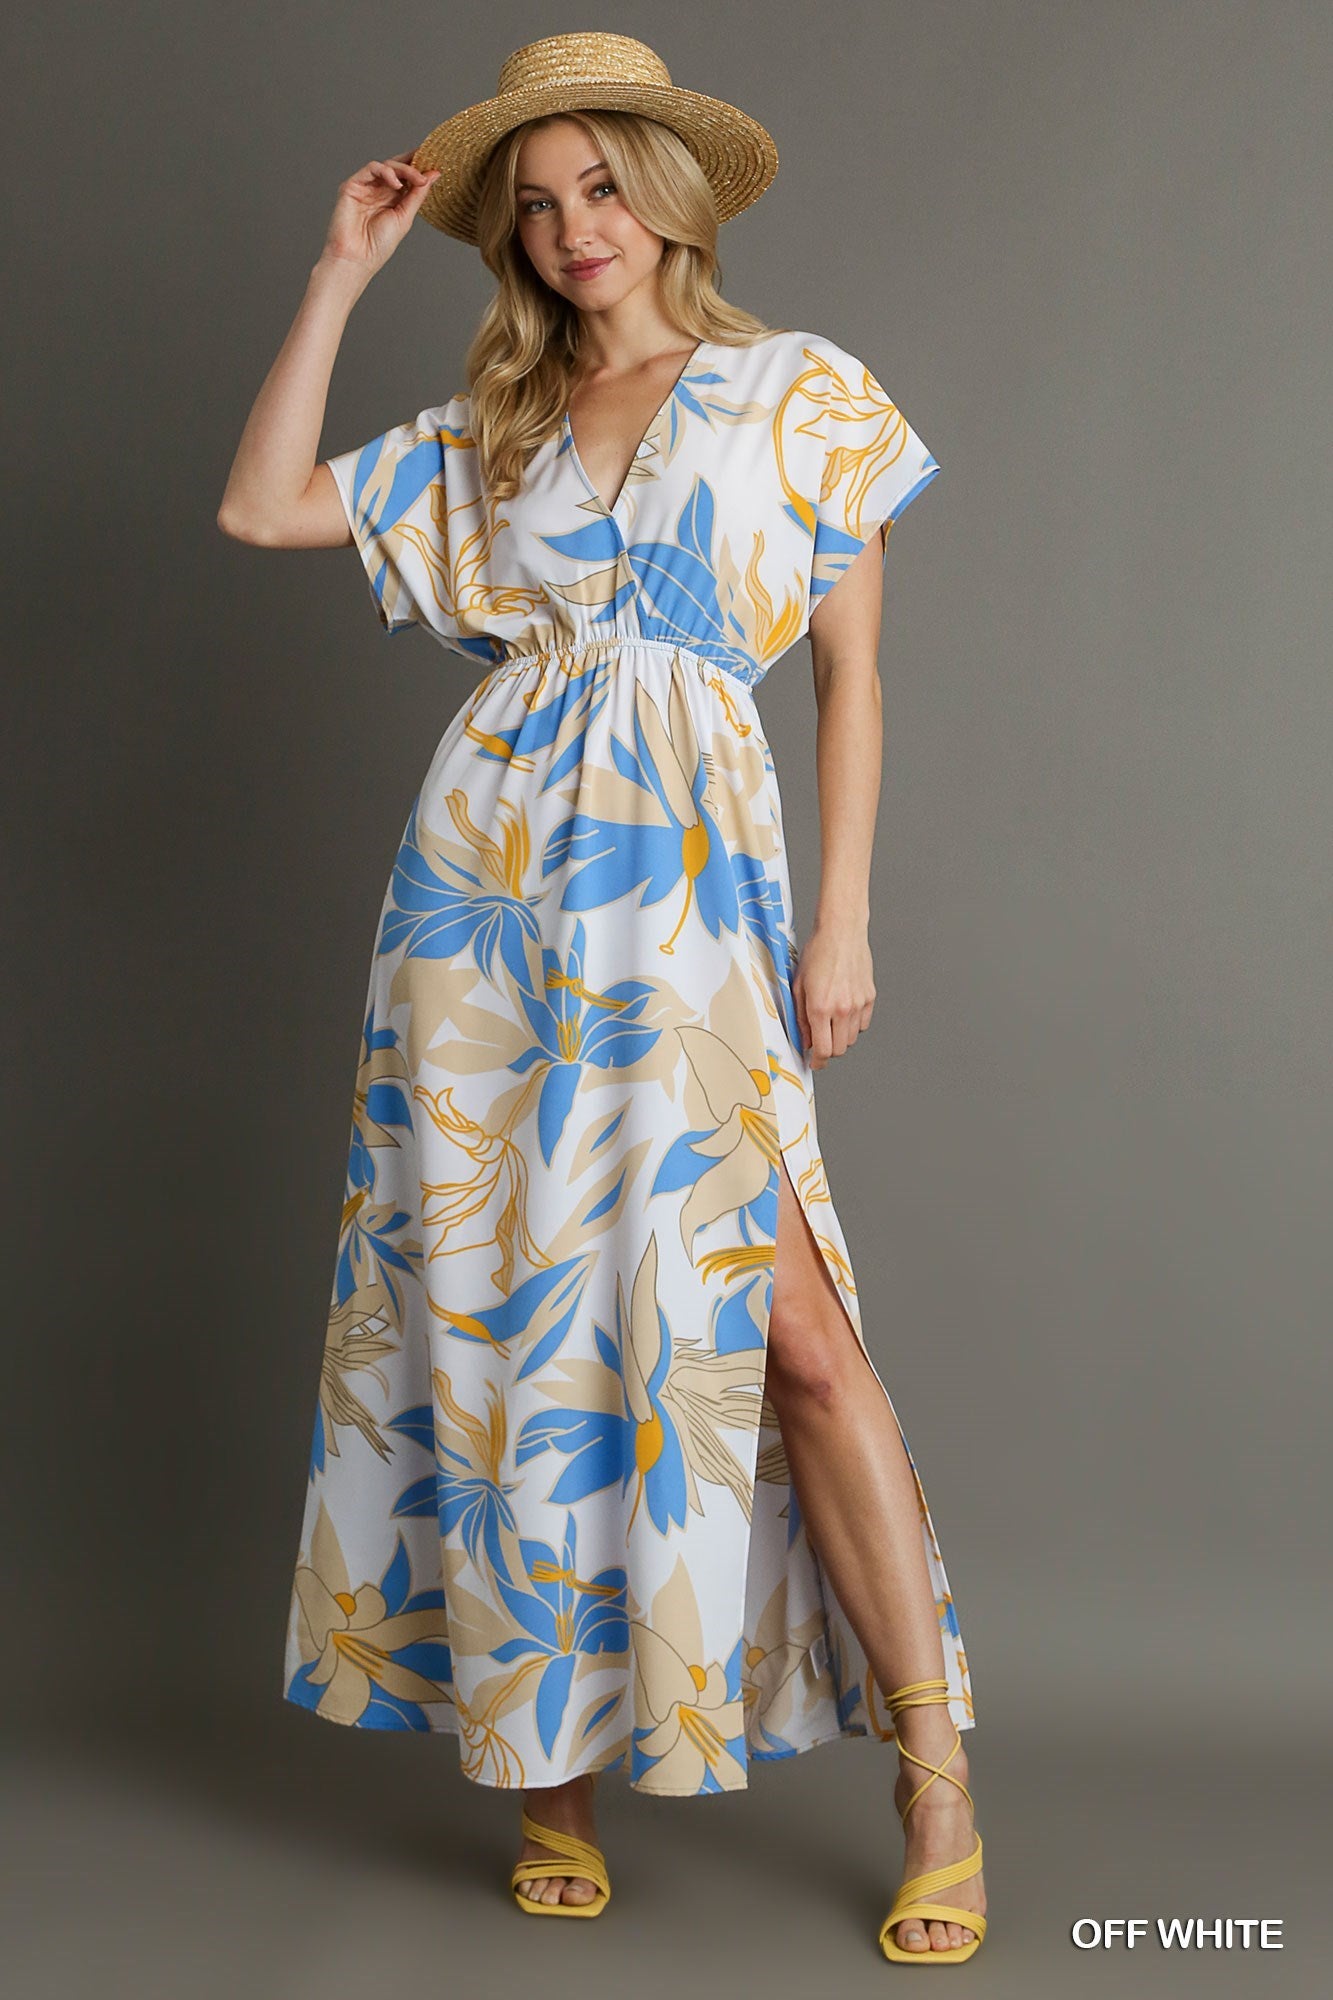 FLORAL A-LINE MAXI DRESS WITH SIDE SLIT - OFF WHITE